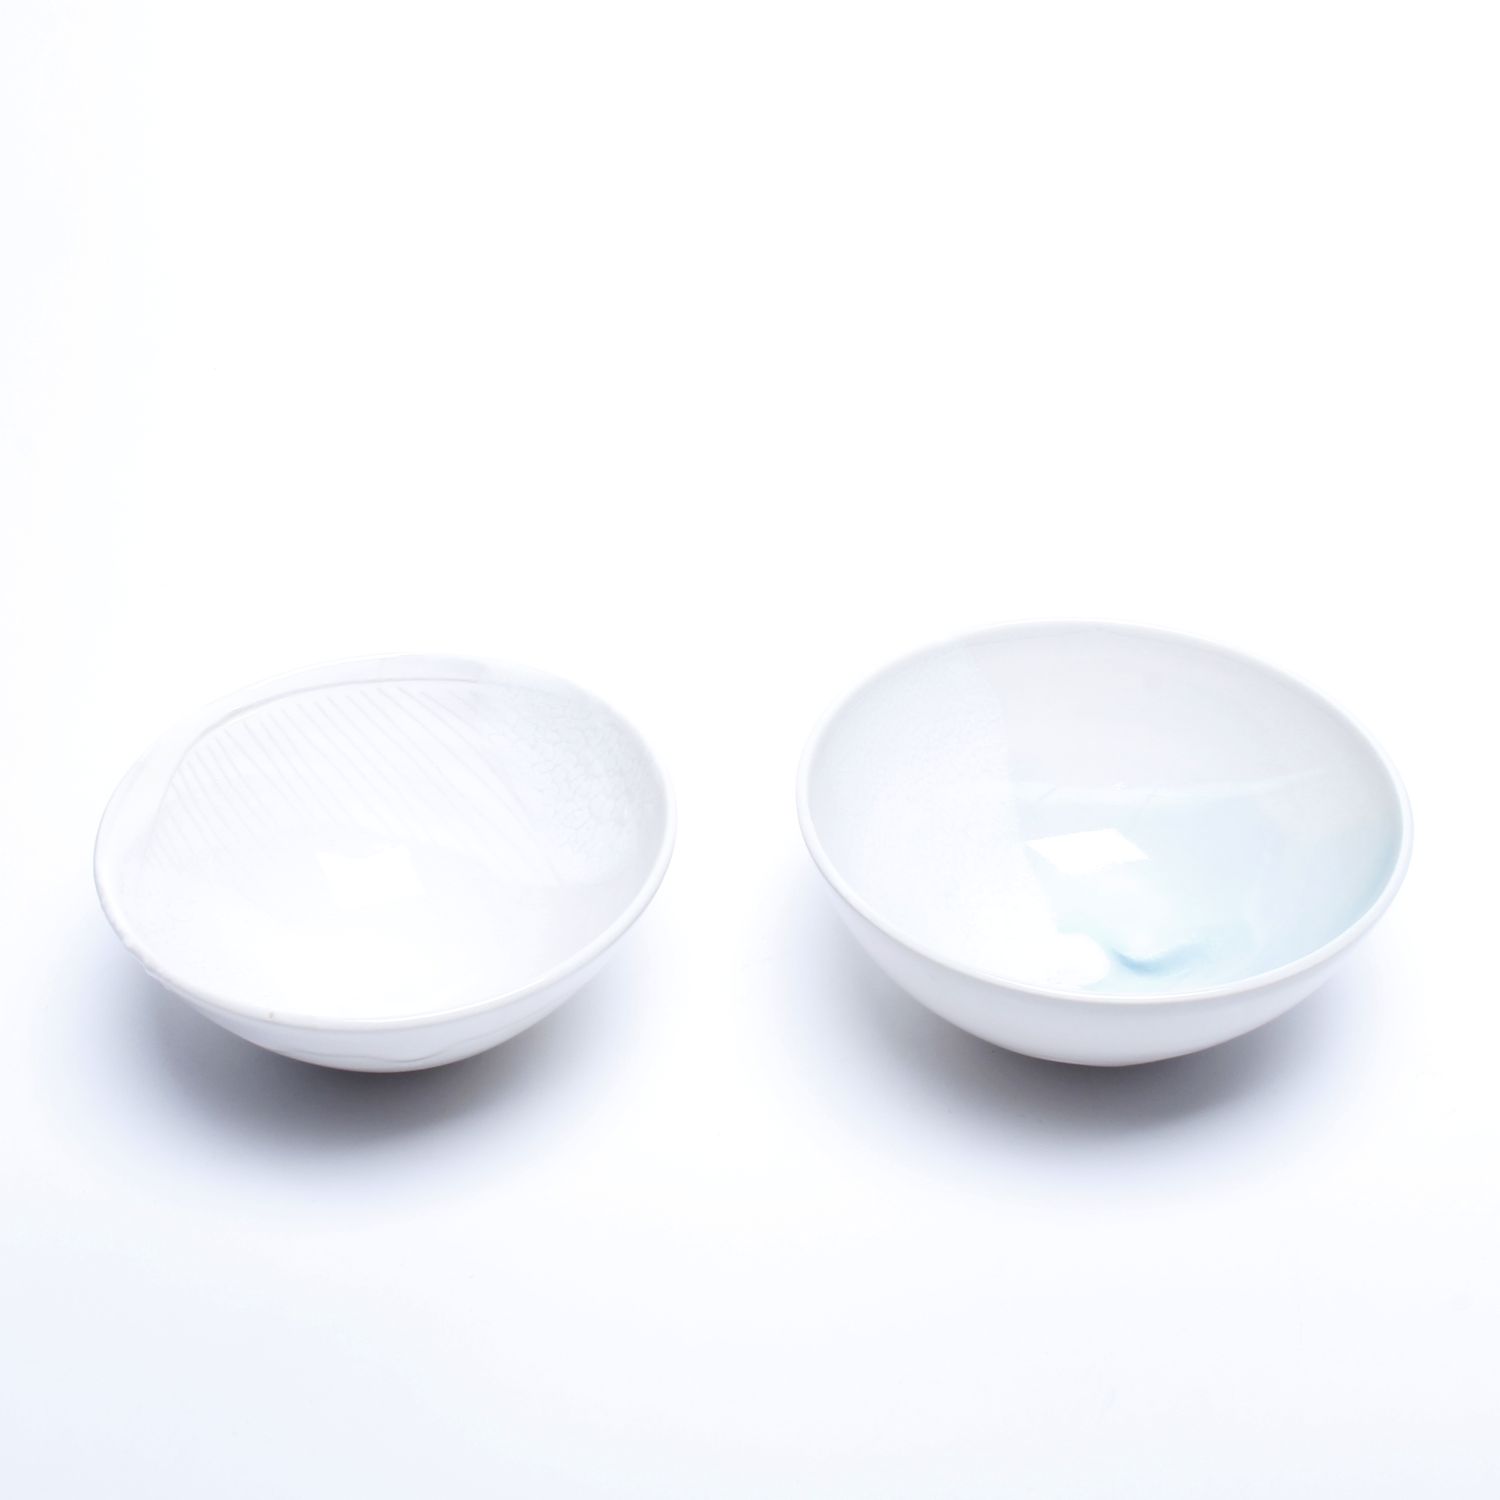 Jane Wilson: Small Bowl Product Image 3 of 4